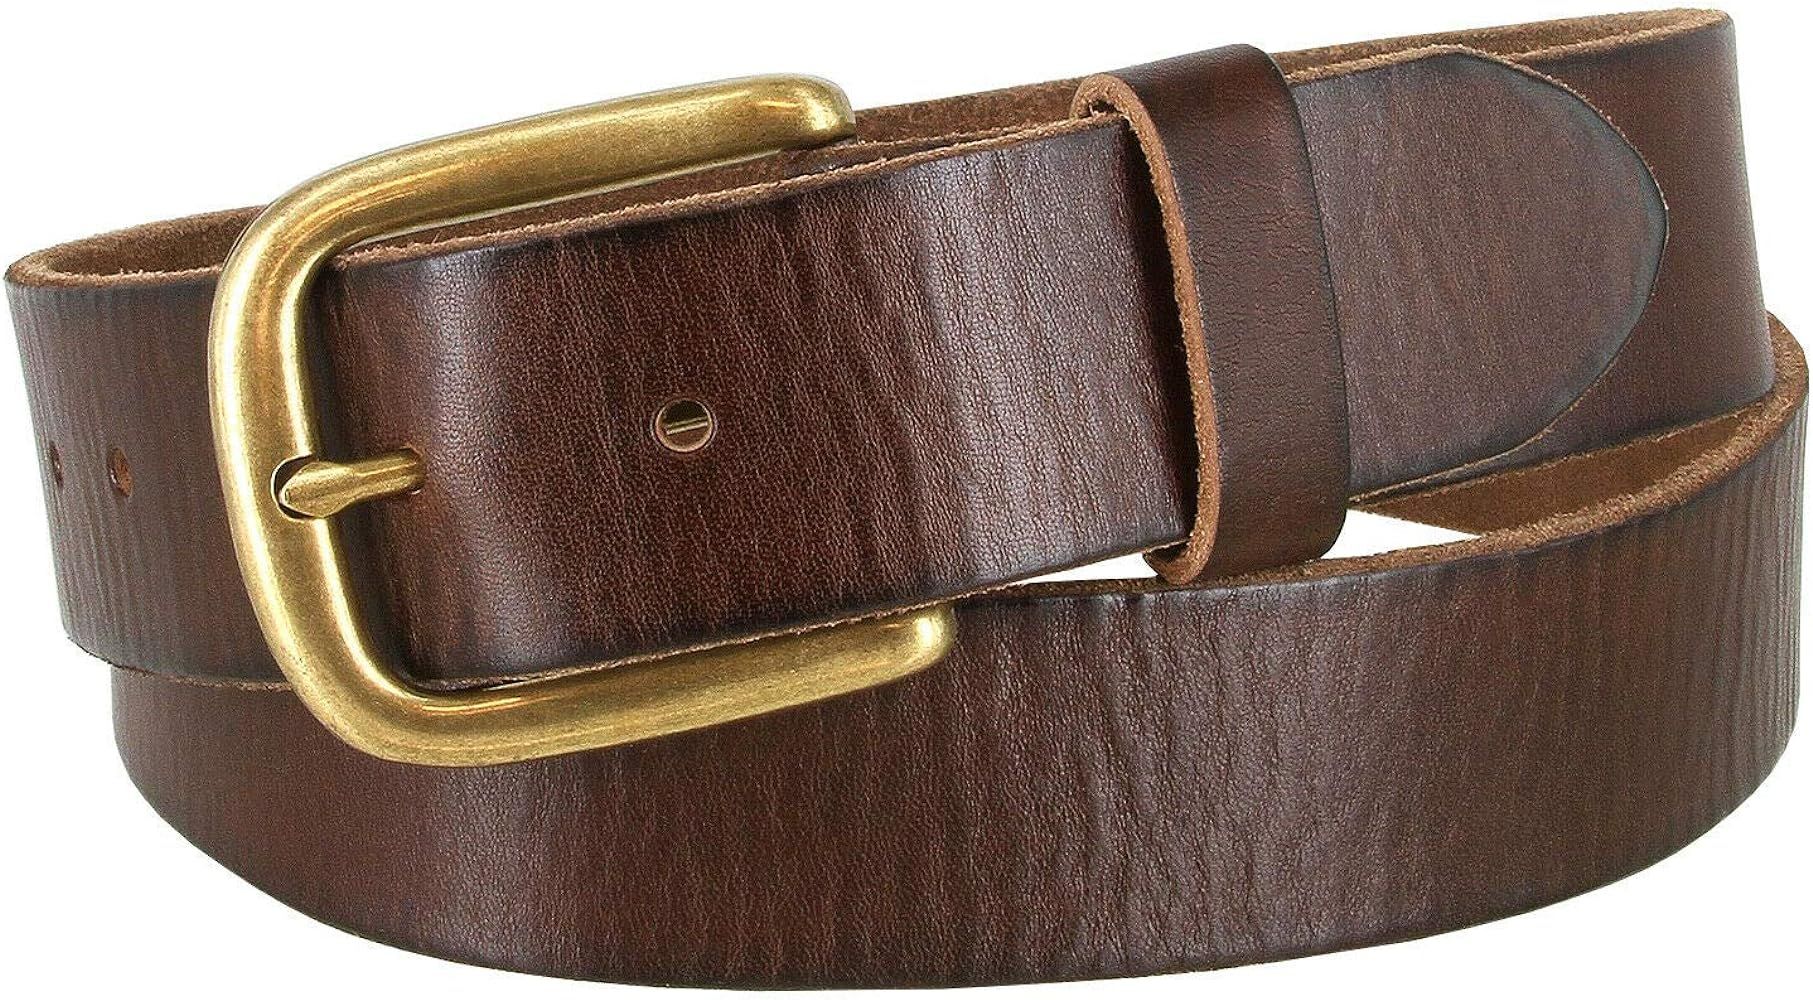 BS040-P3588 One Piece Genuine Full Grain Leather Casual Jean Belt 1-1/2" (38mm) Wide | Amazon (US)